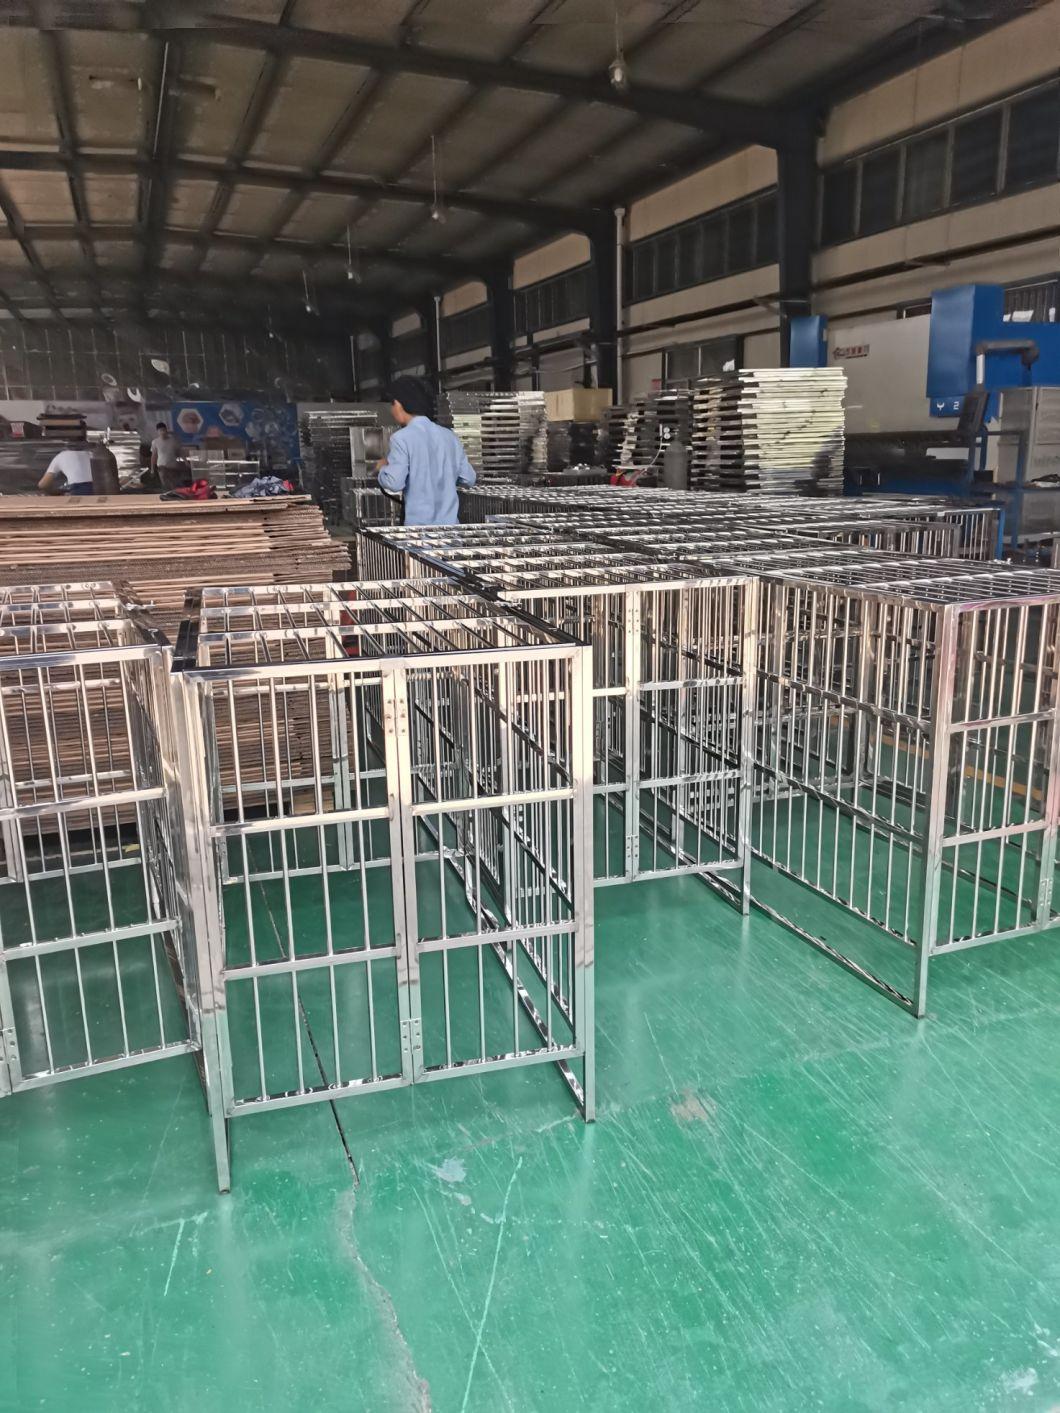 Mt Medical Chinese Manufacturer Pet Stainless Steel Cages Carriers Houses Dog Supplier